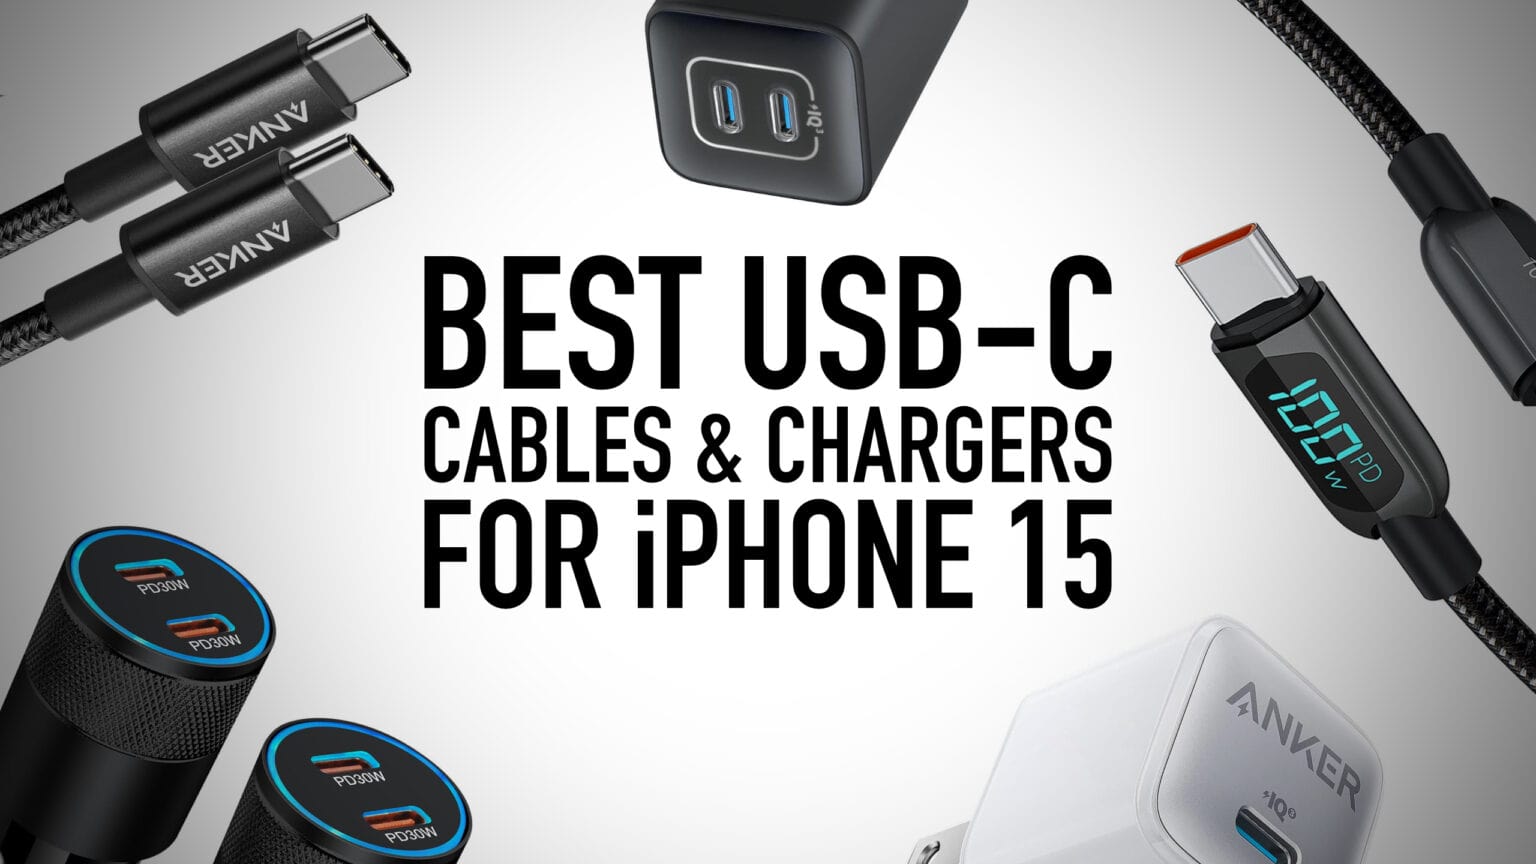 These are the best USB-C cables and chargers for iPhone 15.